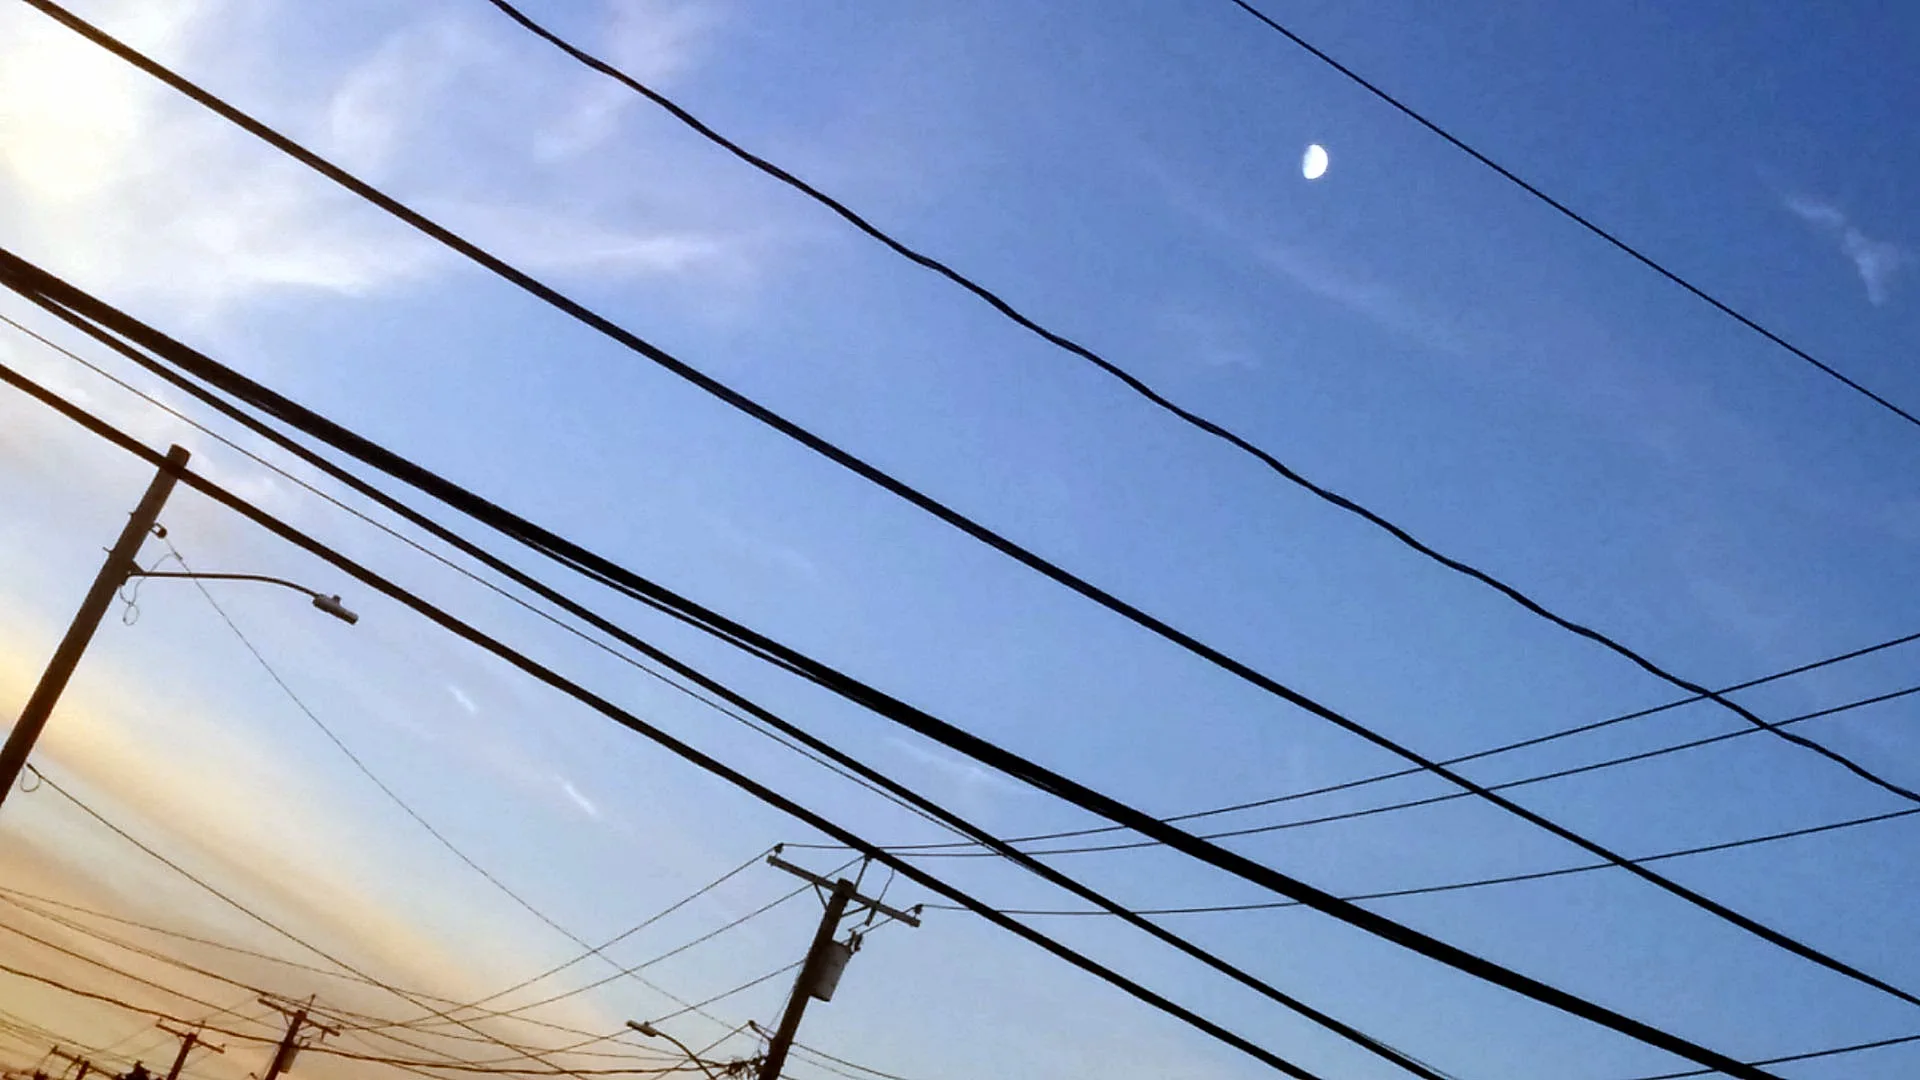 Lines and the Moon